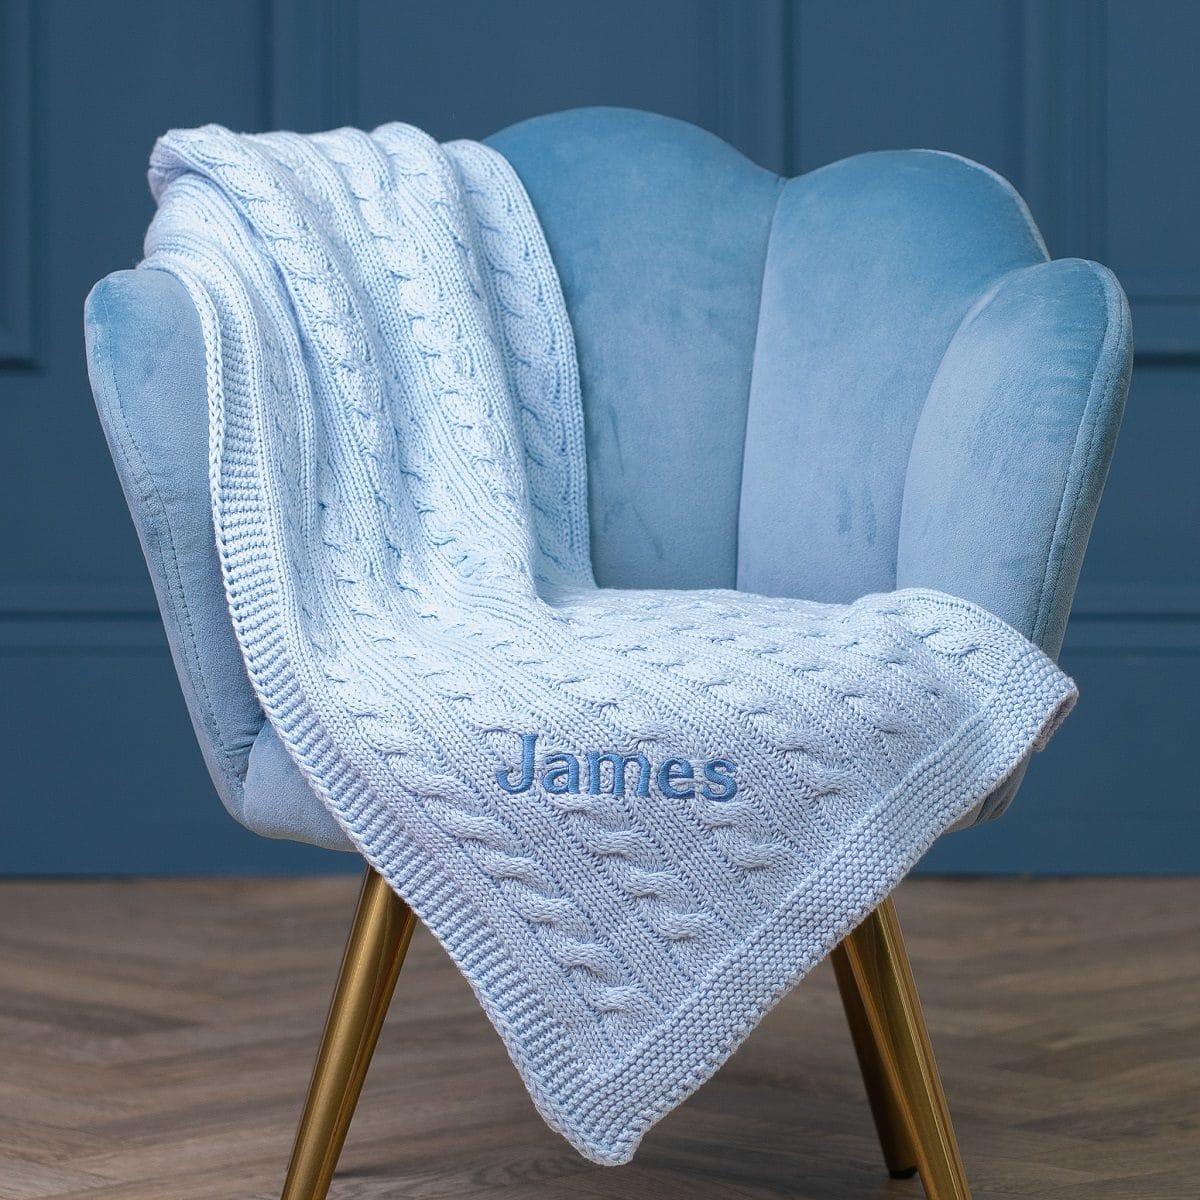 Toffee Moon personalised pale blue luxury cable baby blanket Birthday Gifts 2